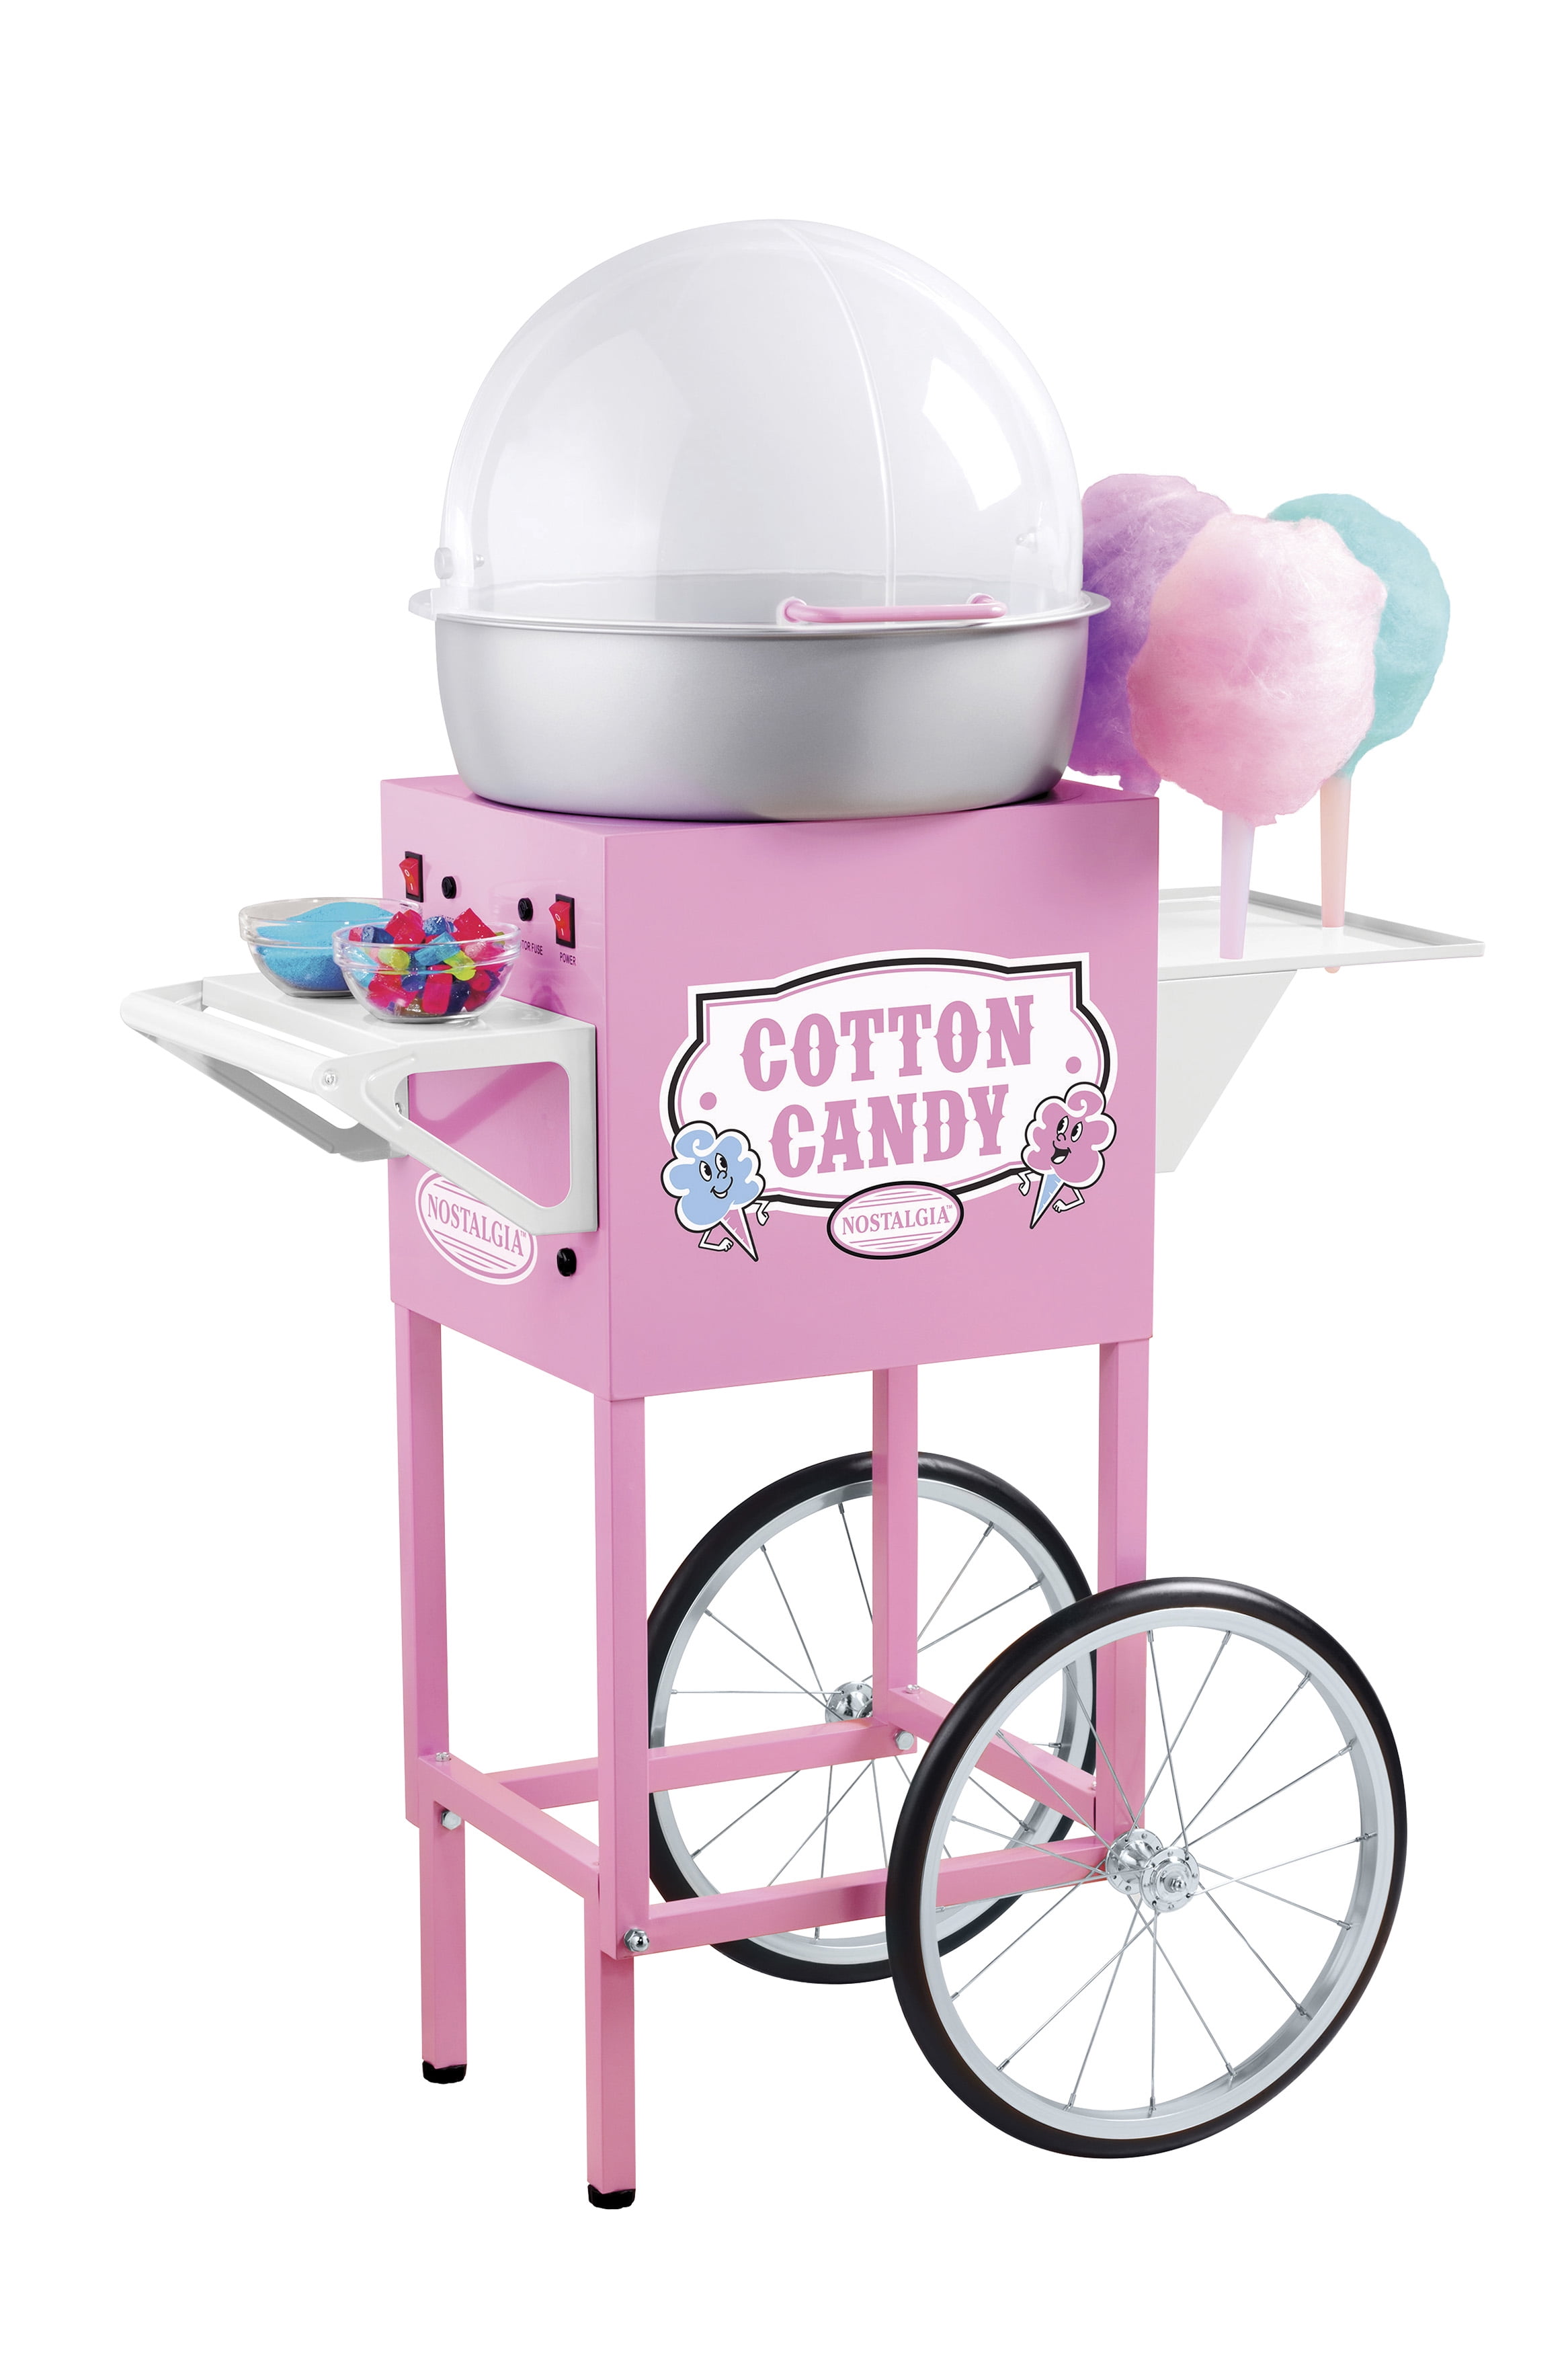 Pink Trolley Creative Gift Pink JK-1801 Electric Commercial Candy Floss Maker with Cart Stainless Steel Big Drawer for Birthdays New Years Family Party Nostalgia Cotton Candy Maker Weddings 